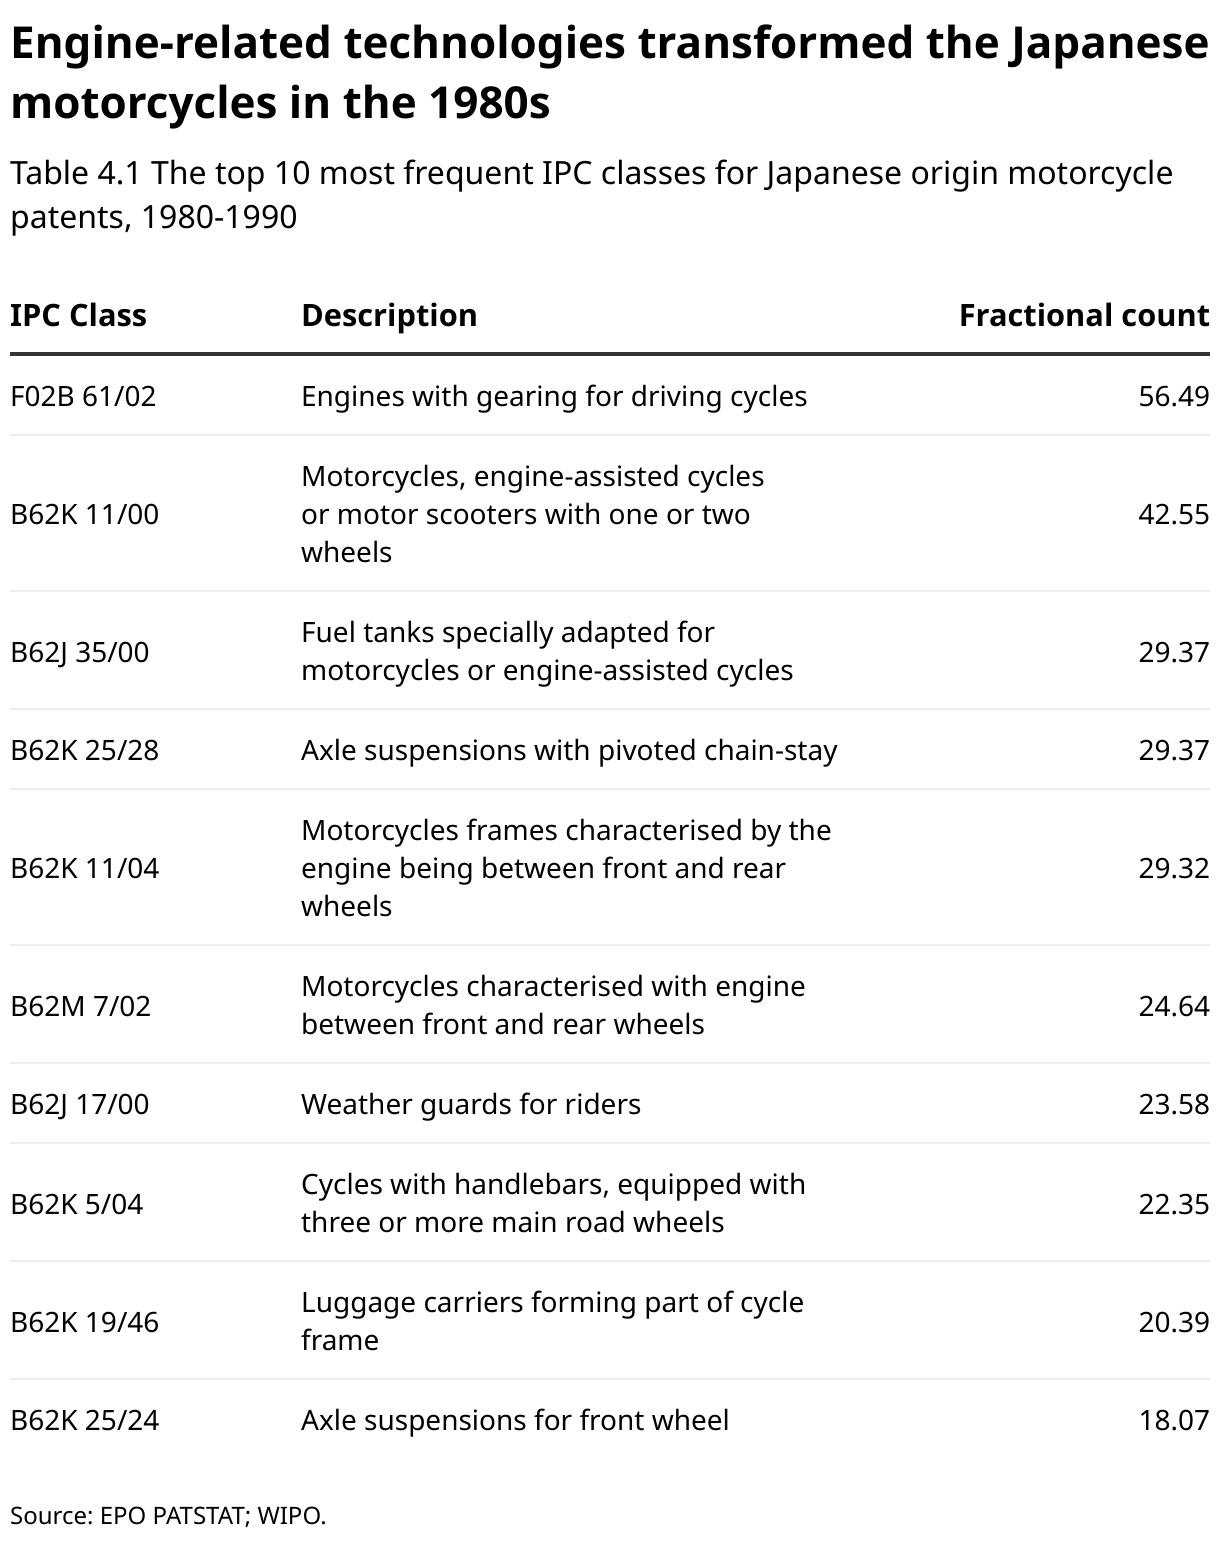 This table lists the top 10 International Patent Classification (IPC) classes for Japanese origin motorcycle patents between 1980 and 1990. Each row of the table includes the IPC class, a brief description of the class, and a fractional count indicating the frequency of patents in that class. The most frequent class is F02B 61/02, concerning engines with gearing for driving cycles, with a frequency of 56.49. This is followed by B62K 11/00 for motorcycles and motor scooters with one or two wheels, at 42.55. Other notable classes include B62J 35/00 for specially adapted fuel tanks at 29.37, and B62K 25/28 dealing with axle suspensions with pivoted chain-stay, also at 29.37. Additional classes cover various aspects of motorcycle design, such as frames, engine placements, weather guards for riders, cycles with three or more wheels, luggage carriers that form part of the cycle frame, and axle suspensions for front wheels.